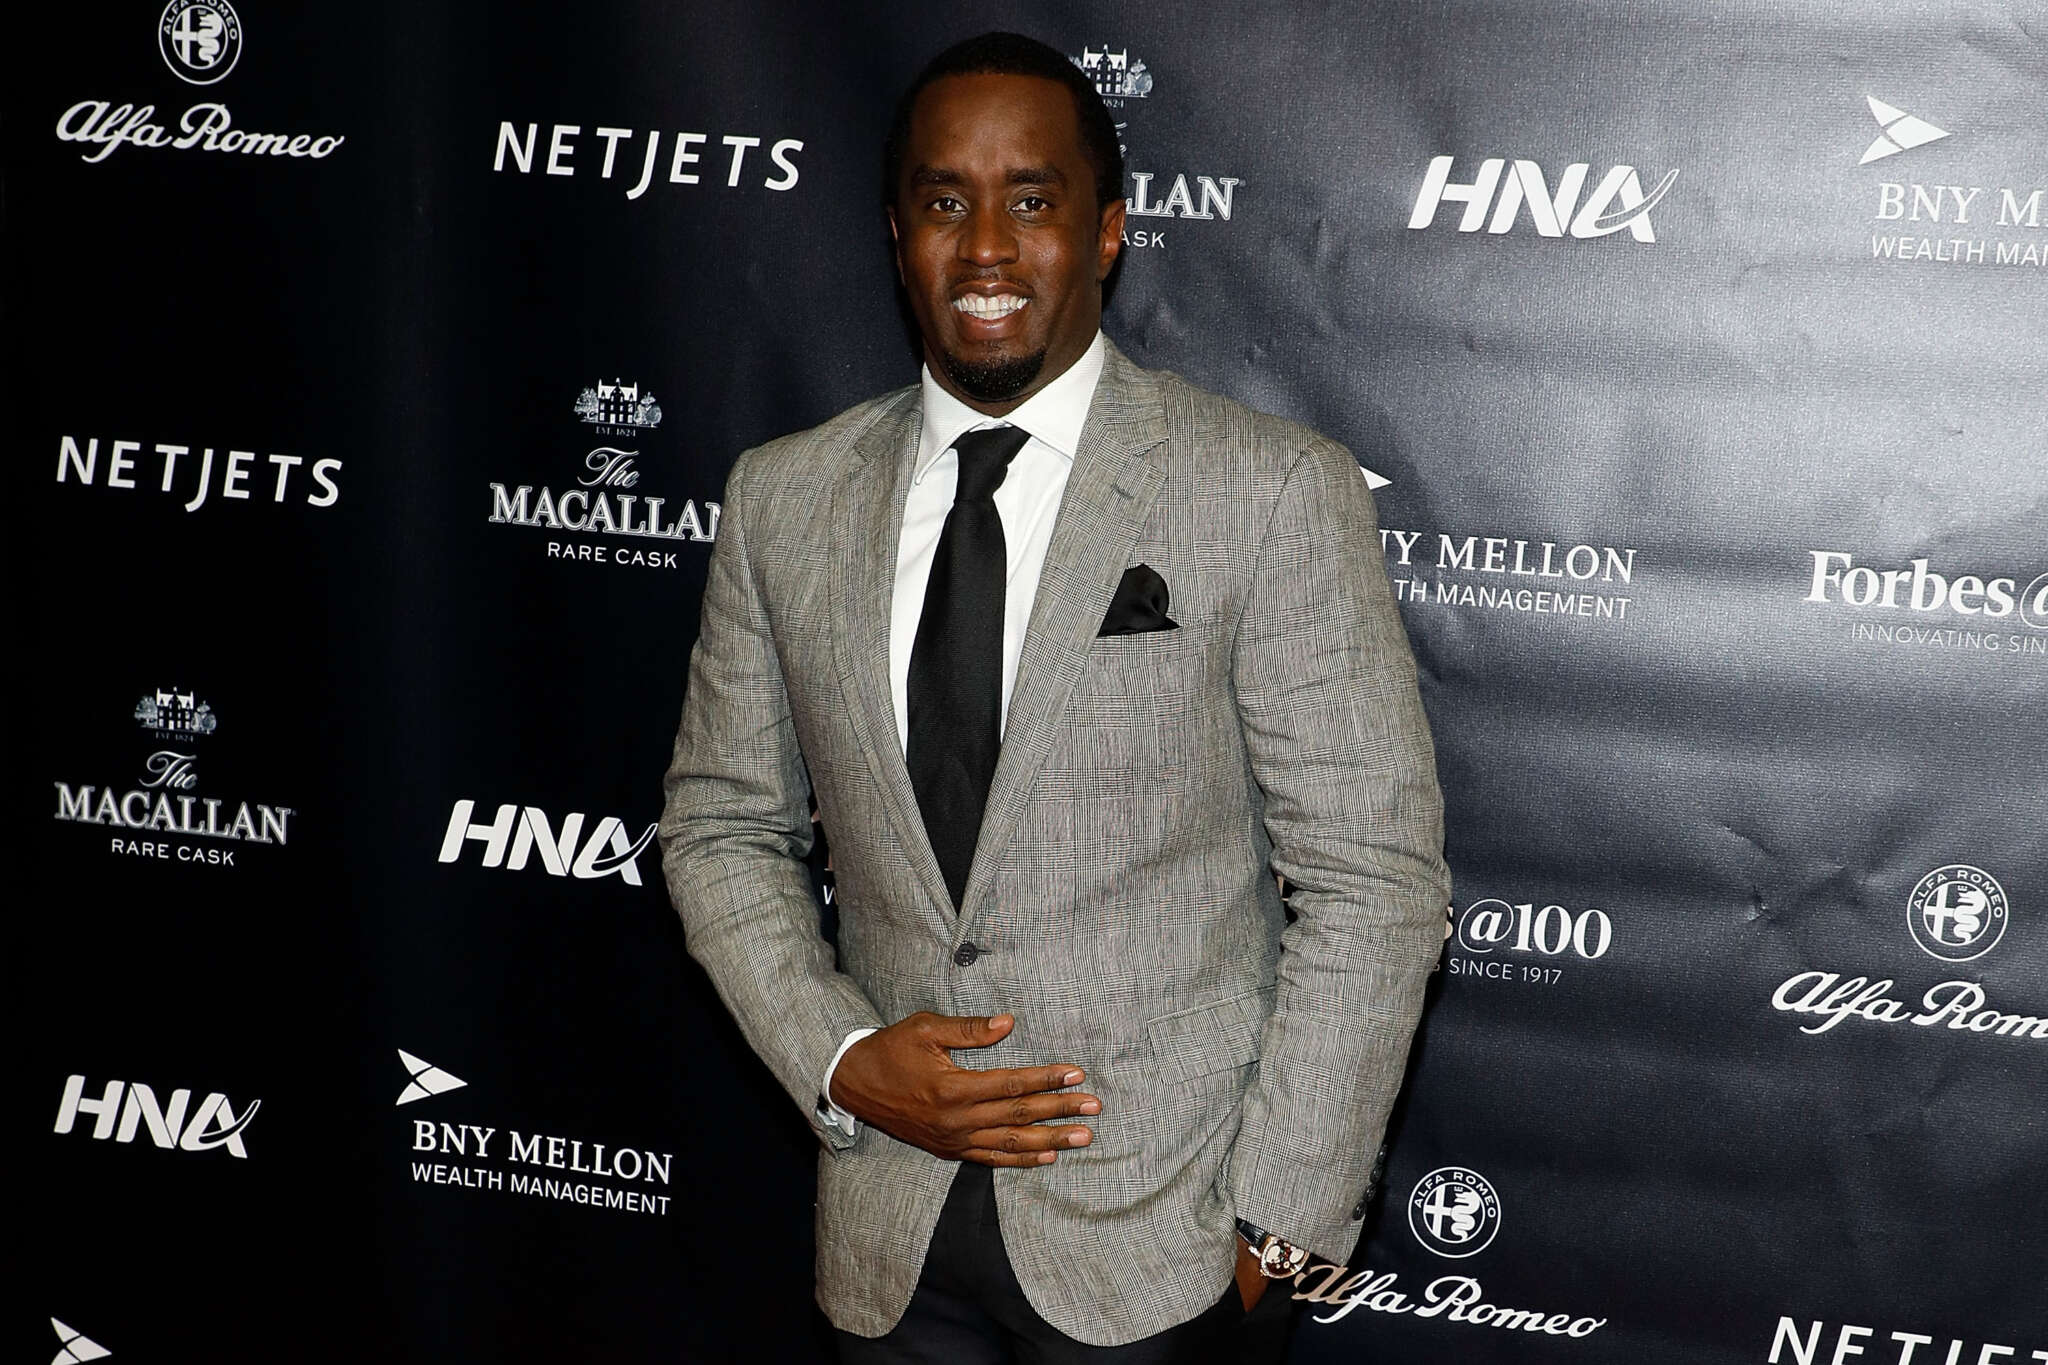 Diddy's Fans Say He's Killing It In This Recent Photo - Check It Out Here